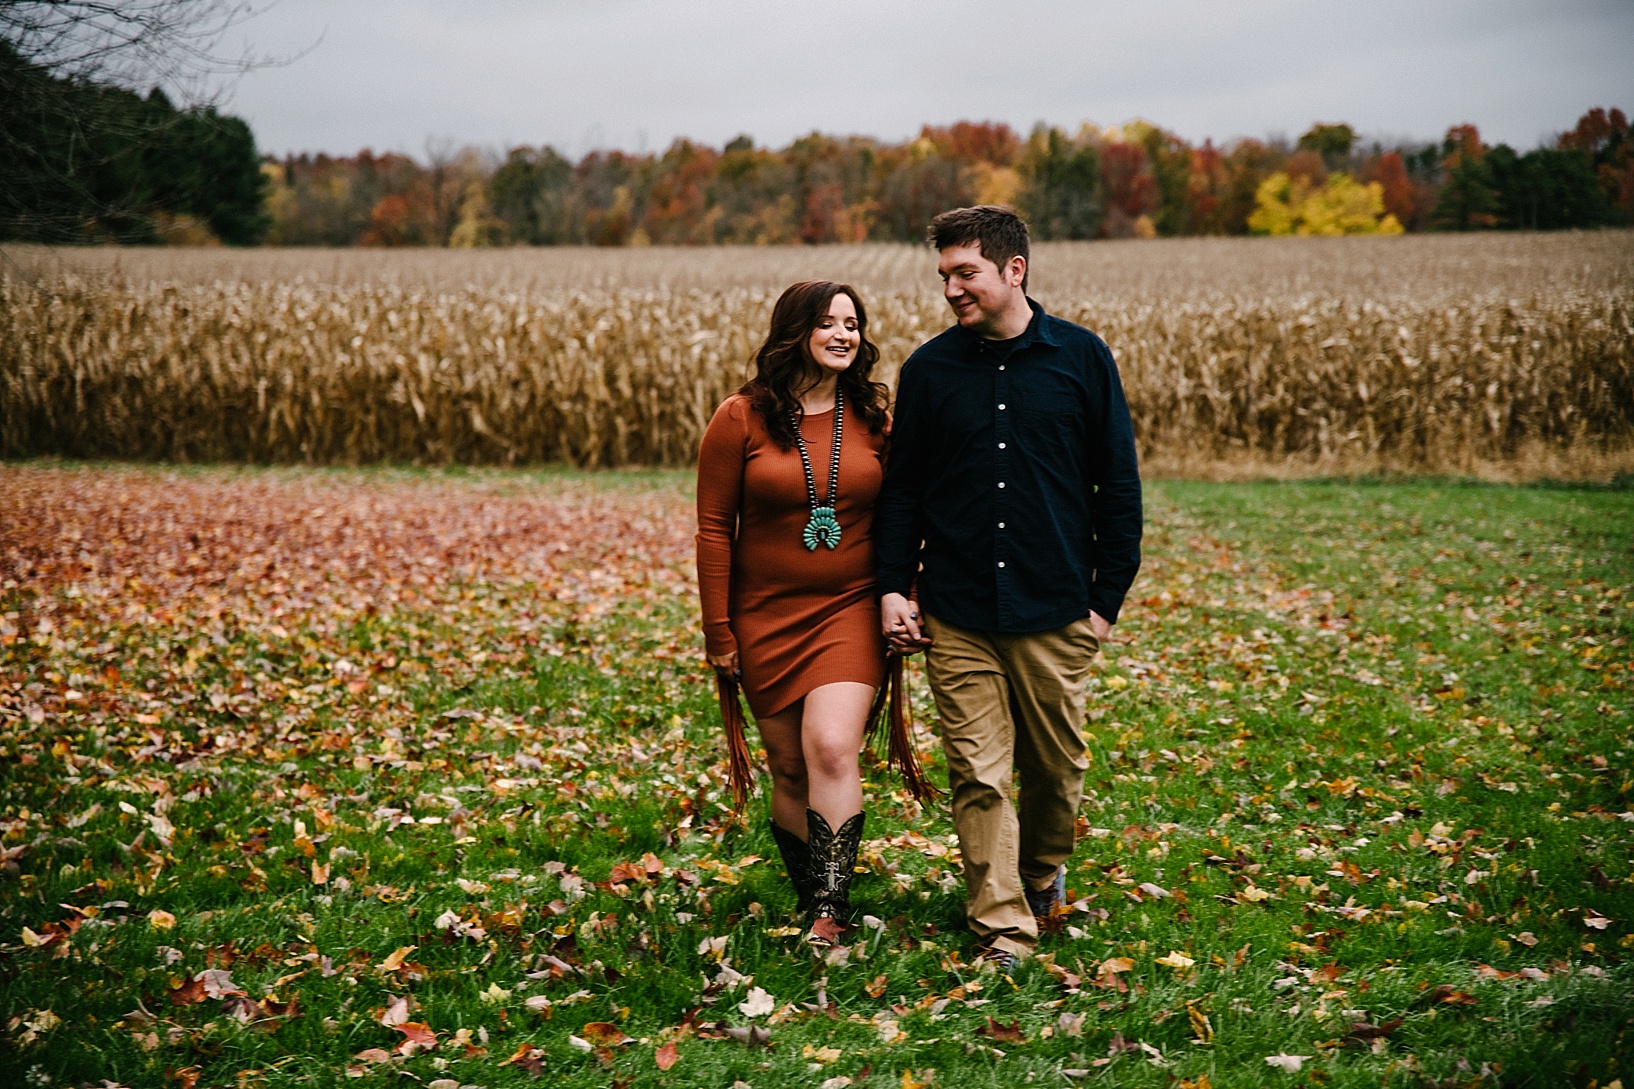 couple walking holding hands with cornfield in the background and leaves on the ground